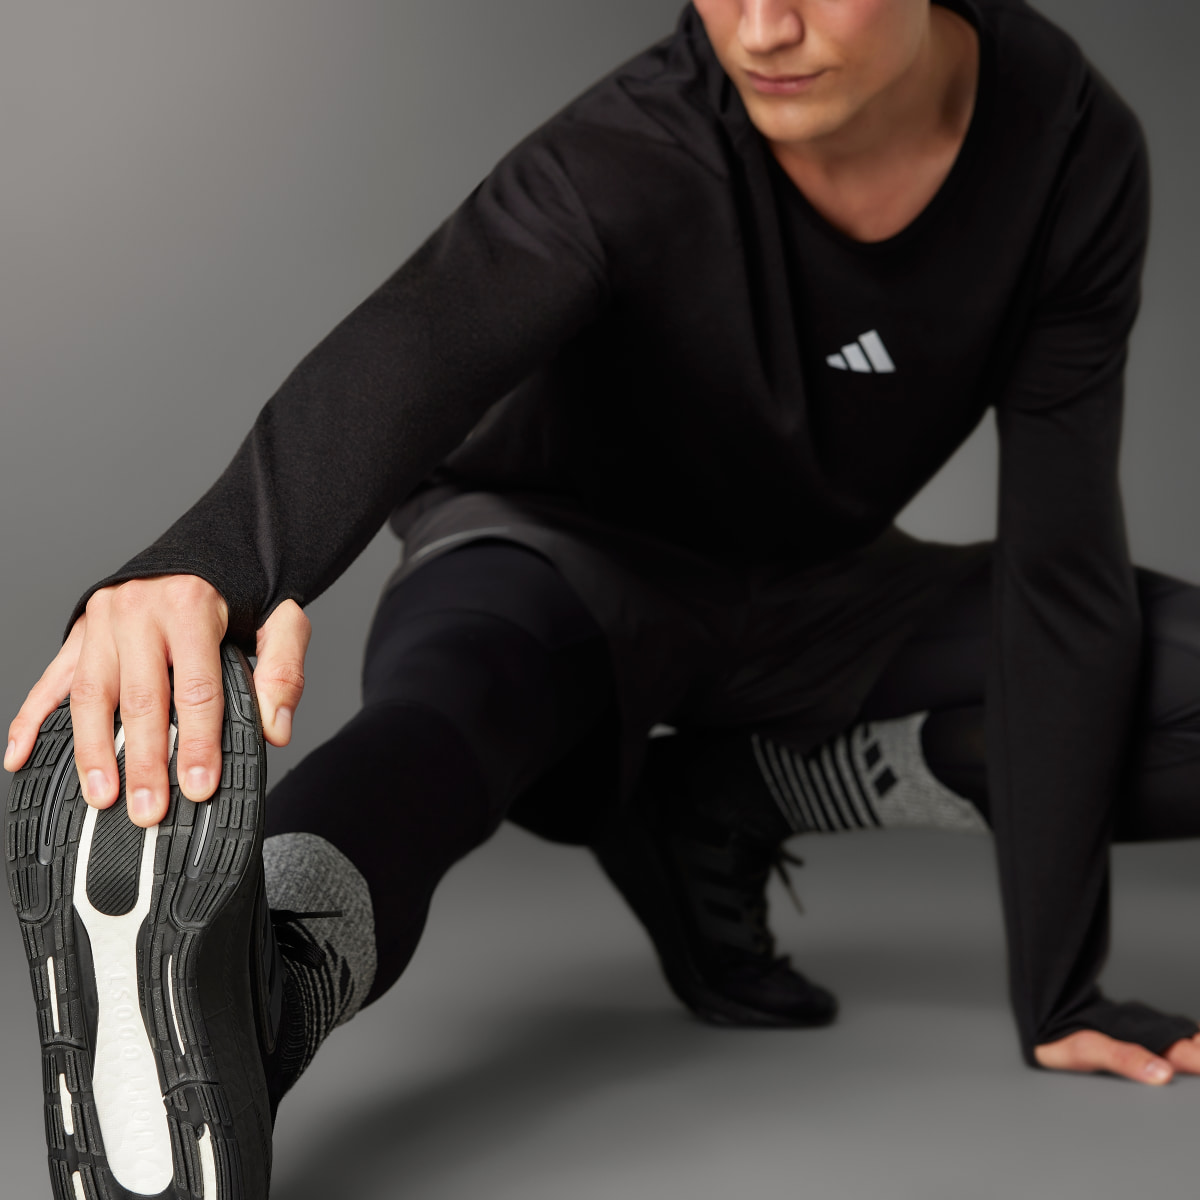 Adidas Ultimate Running Conquer the Elements Merino Long Sleeve Long-sleeve Top. 7